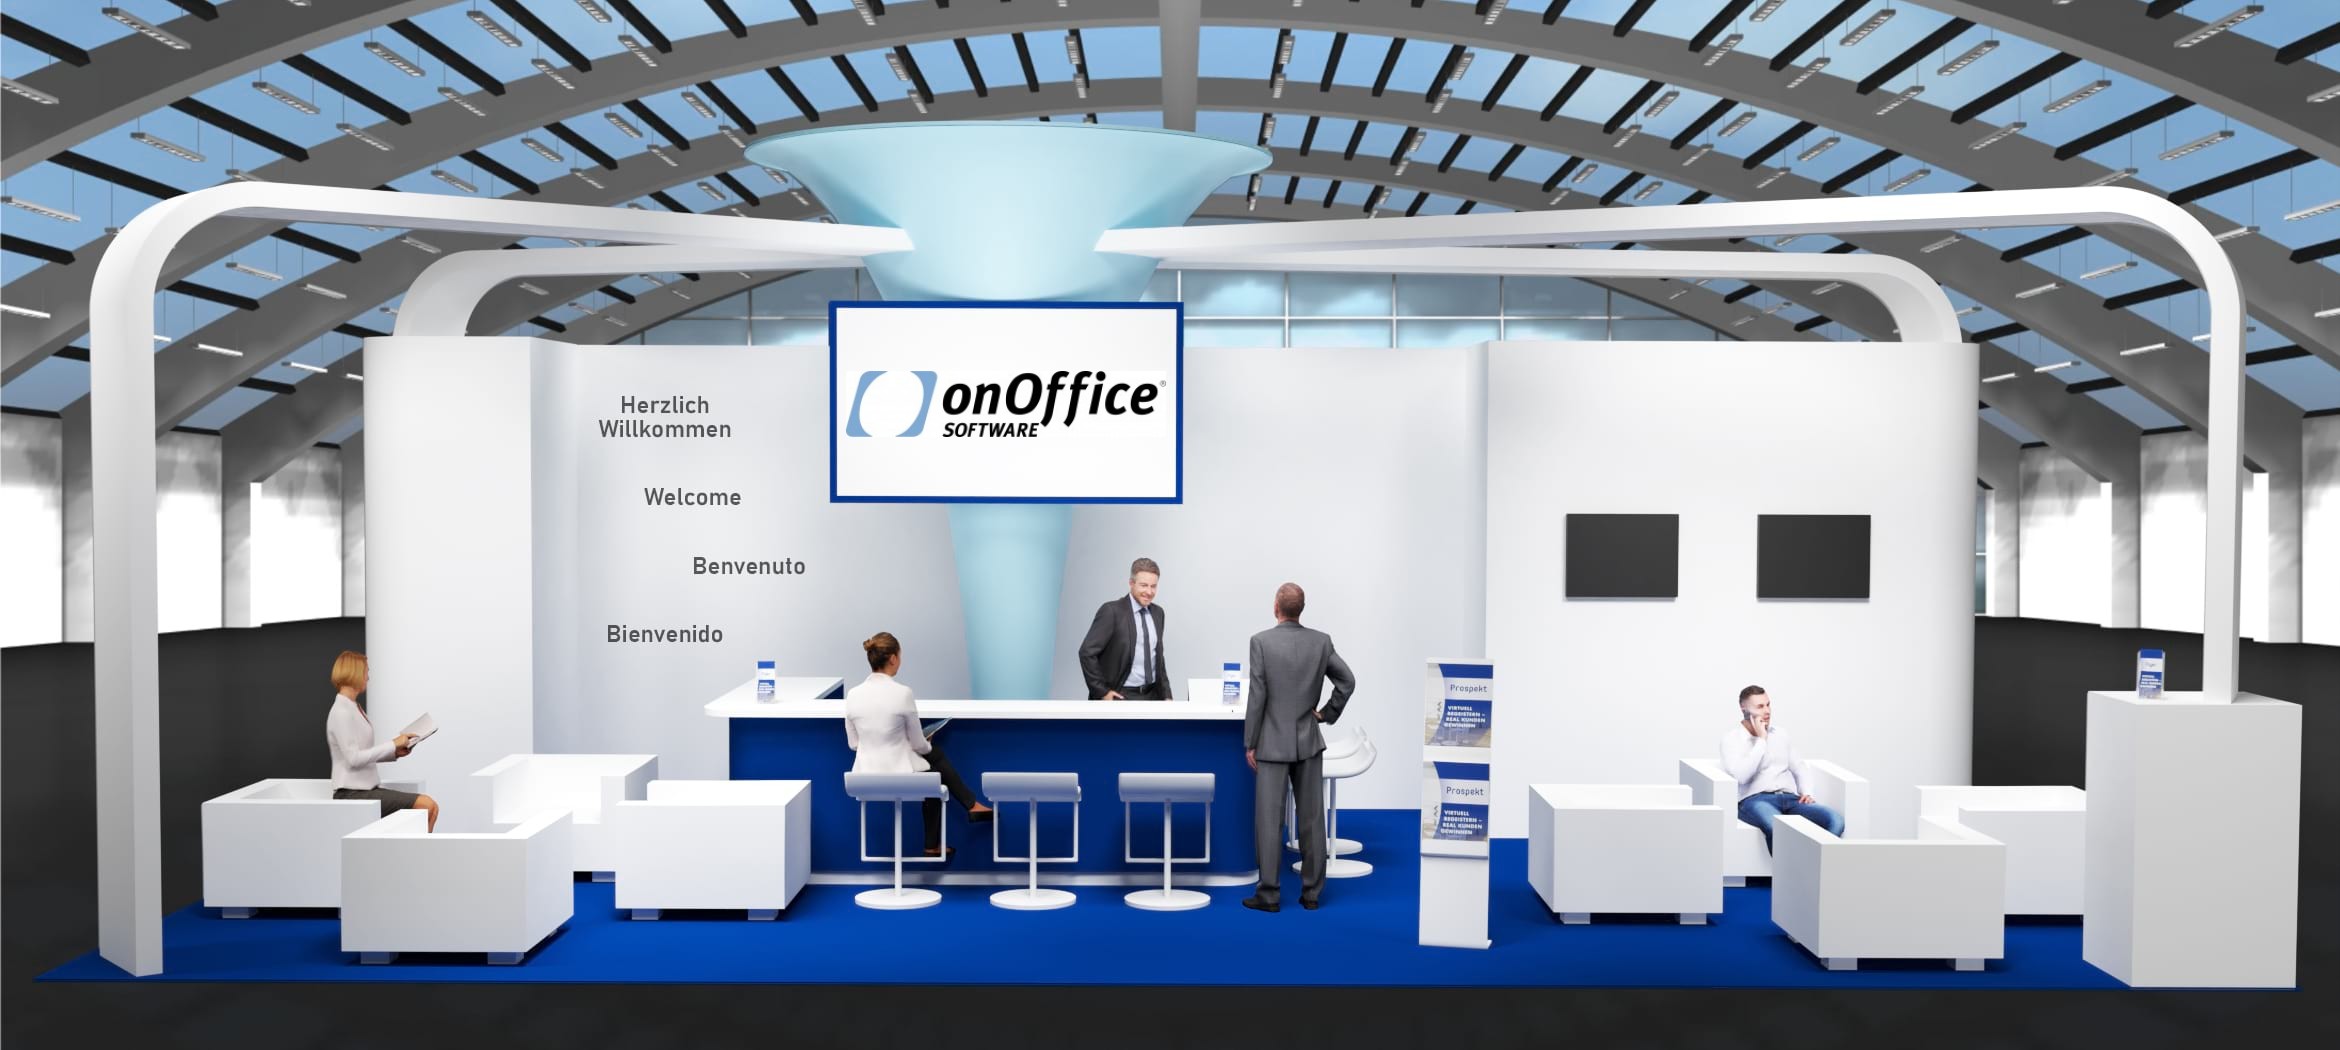 OnOffice Software